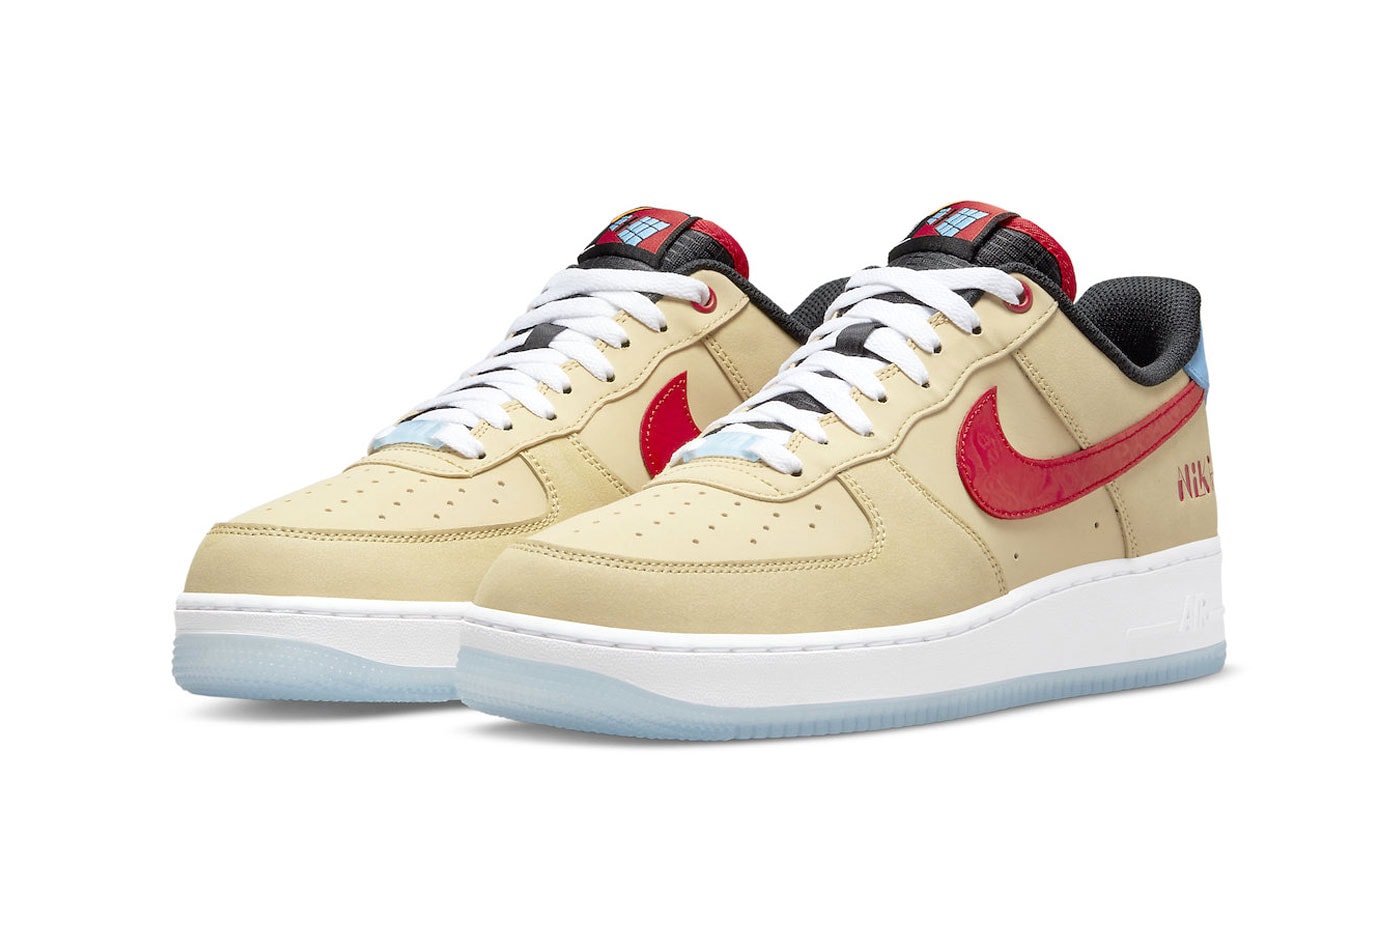 Nike Air Force 1 Low cream red blue black white translucent sole release info news dq7628-200